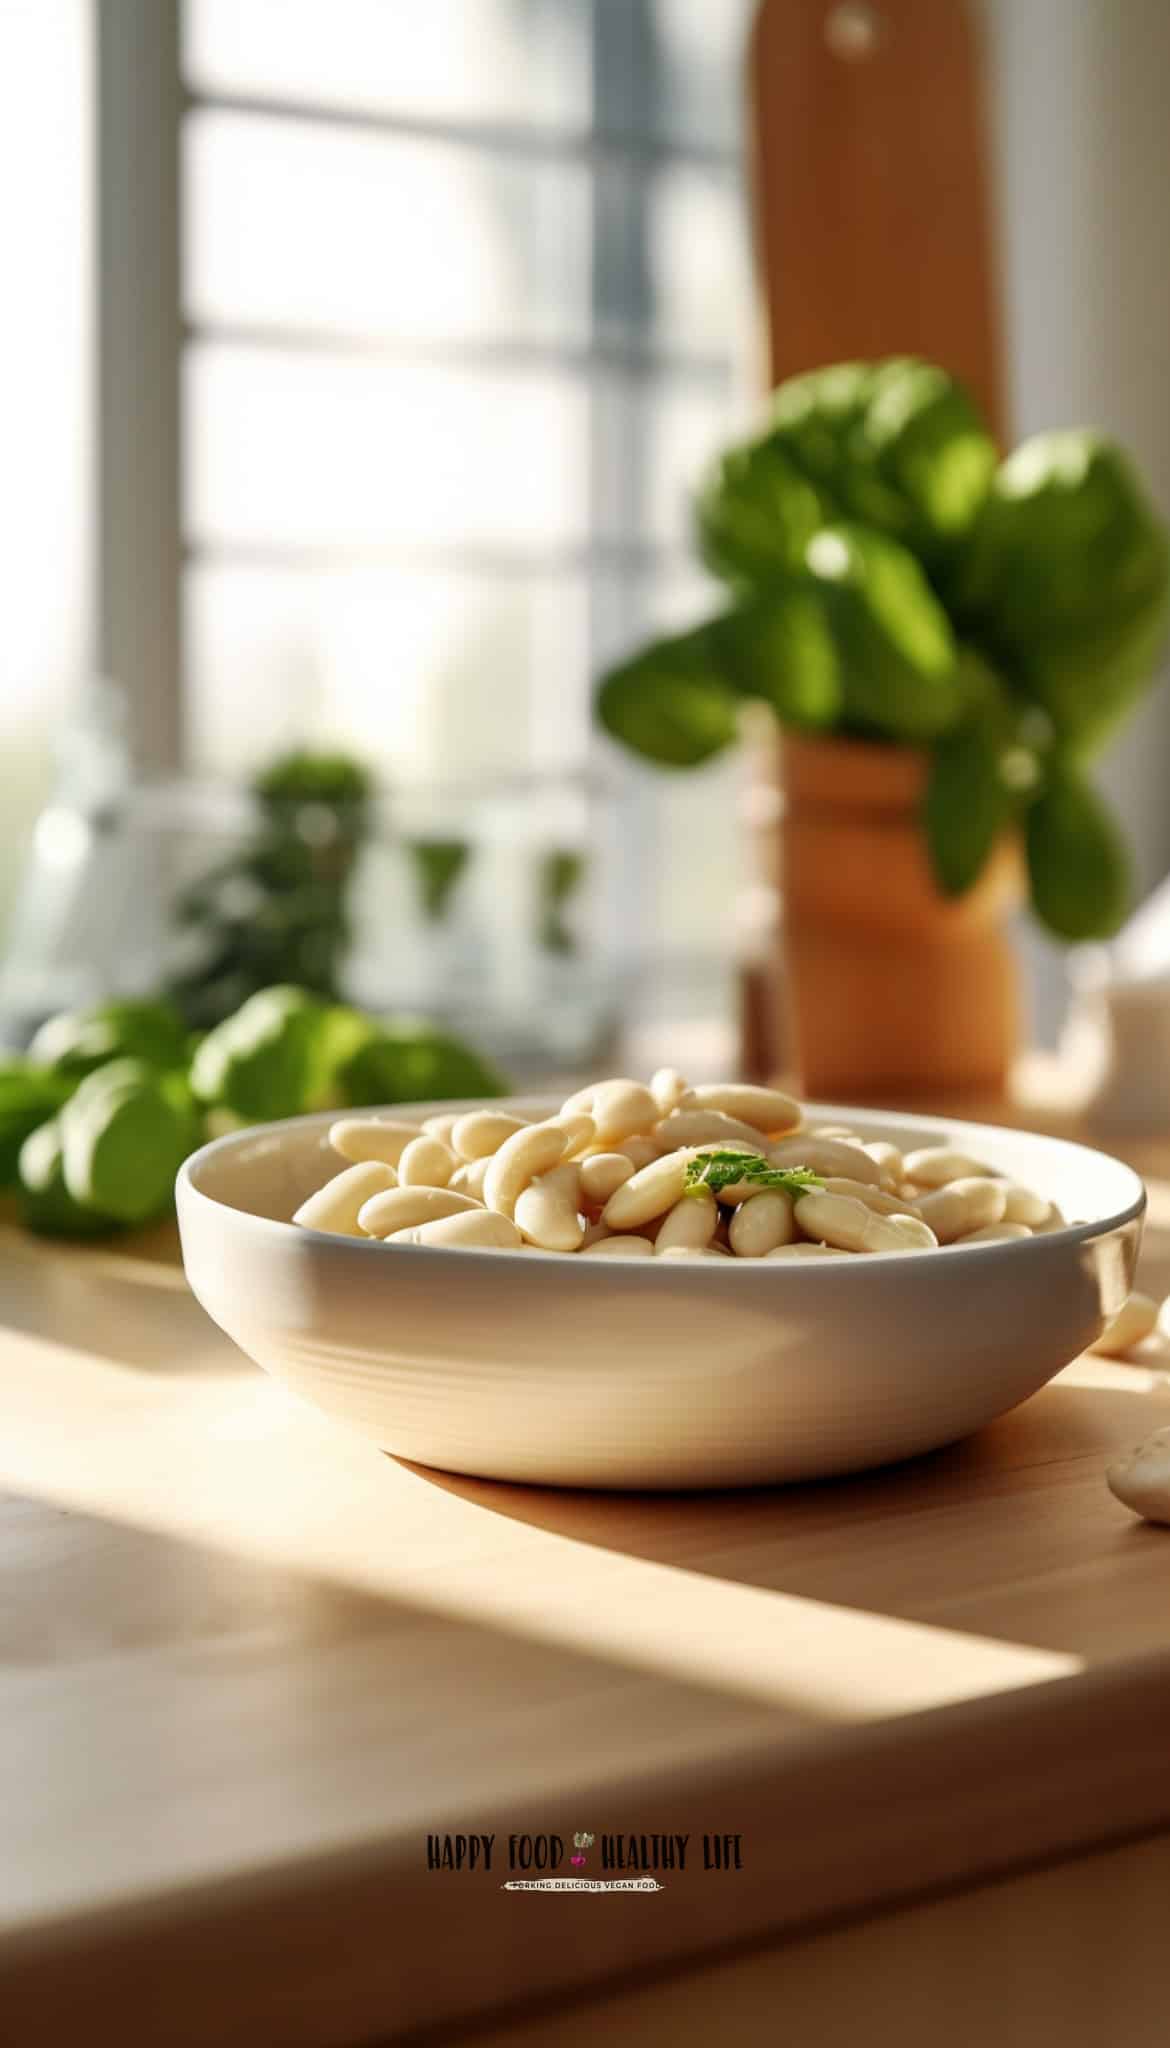 butter beans in a white bowl on a butcher block counter with blurred windows and greenery in the background